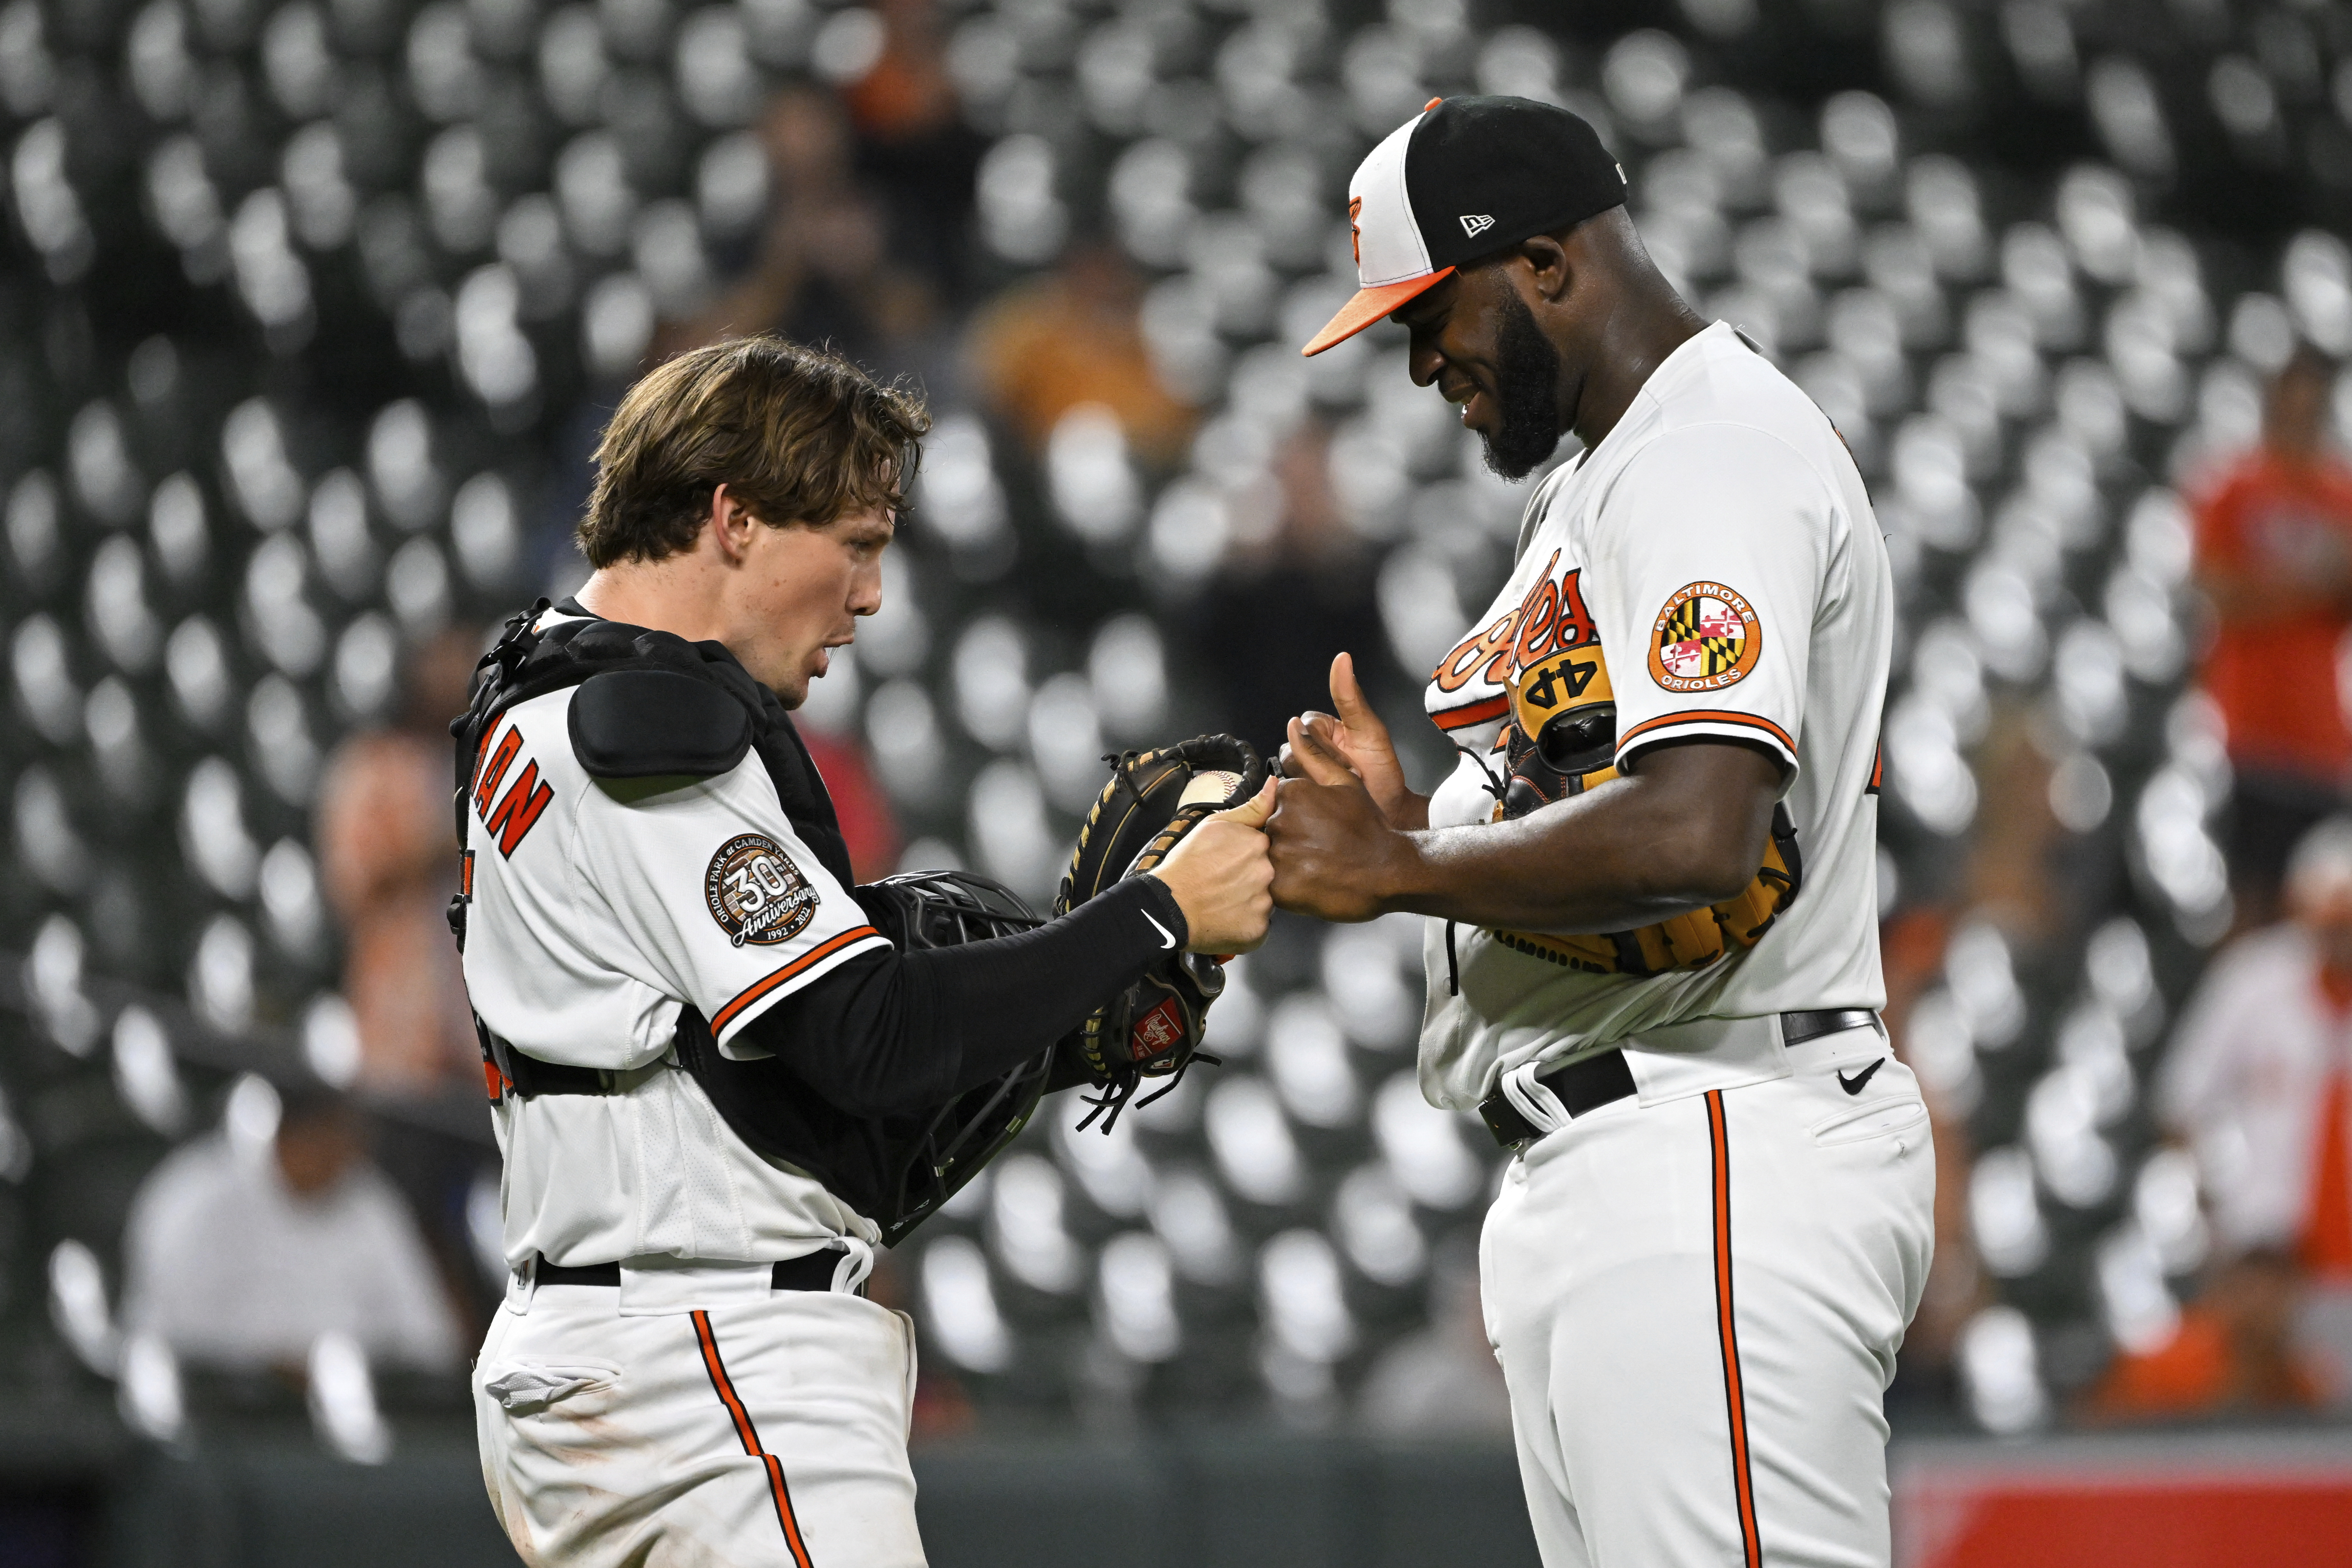 Orioles top Blue Jays 9-6 in heated matchup of contenders - WTOP News